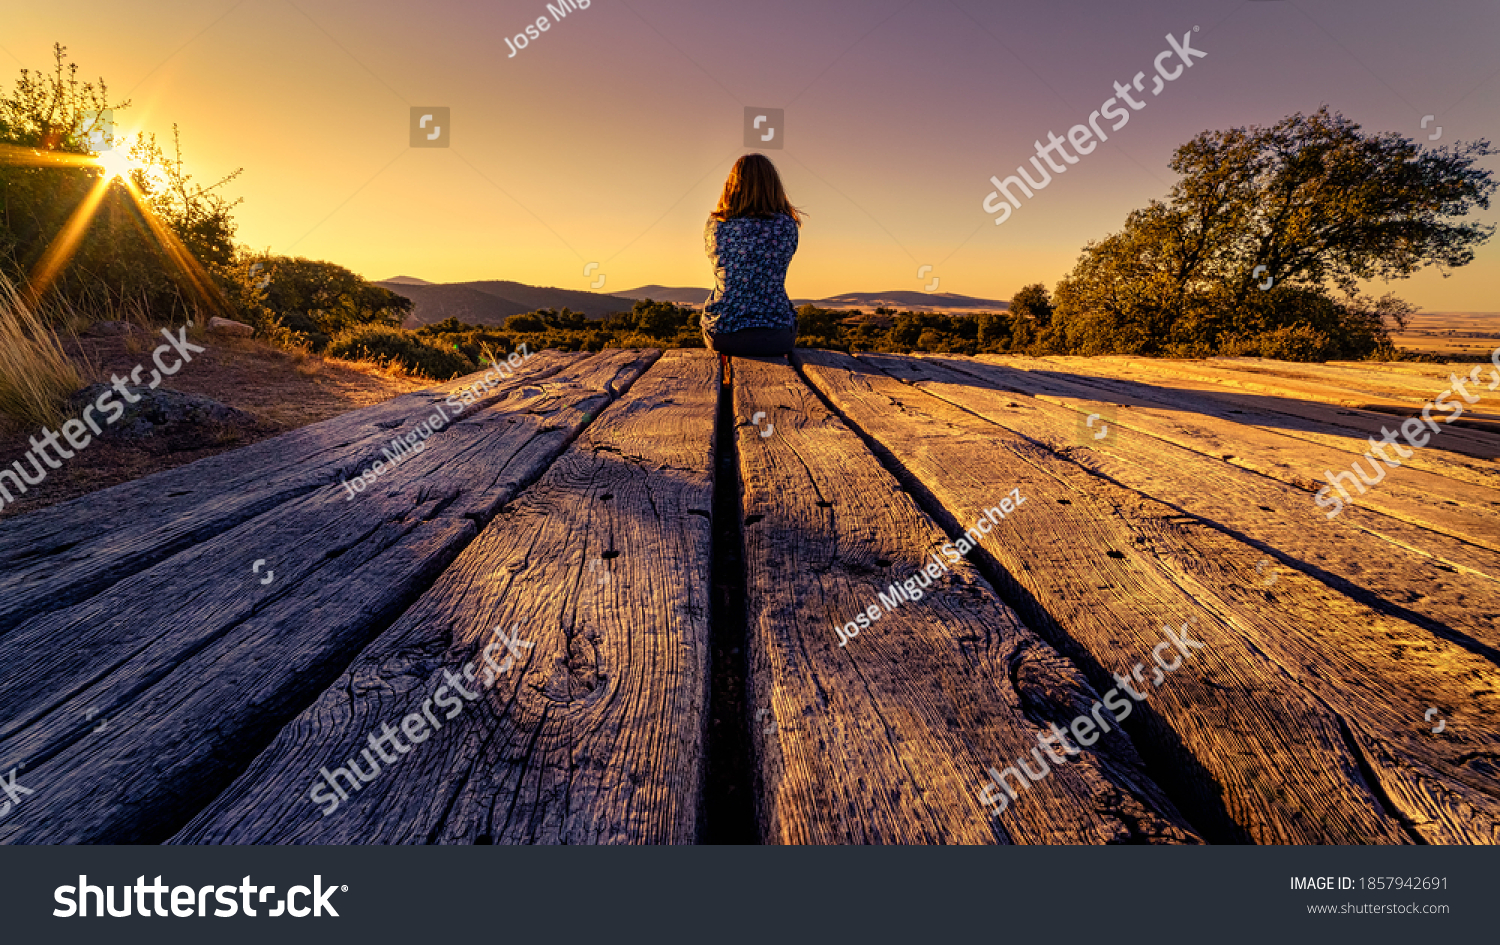 105 / 5000
Woman from behind sitting on a wooden floor, contemplating the horizon with sunset in the field. #1857942691